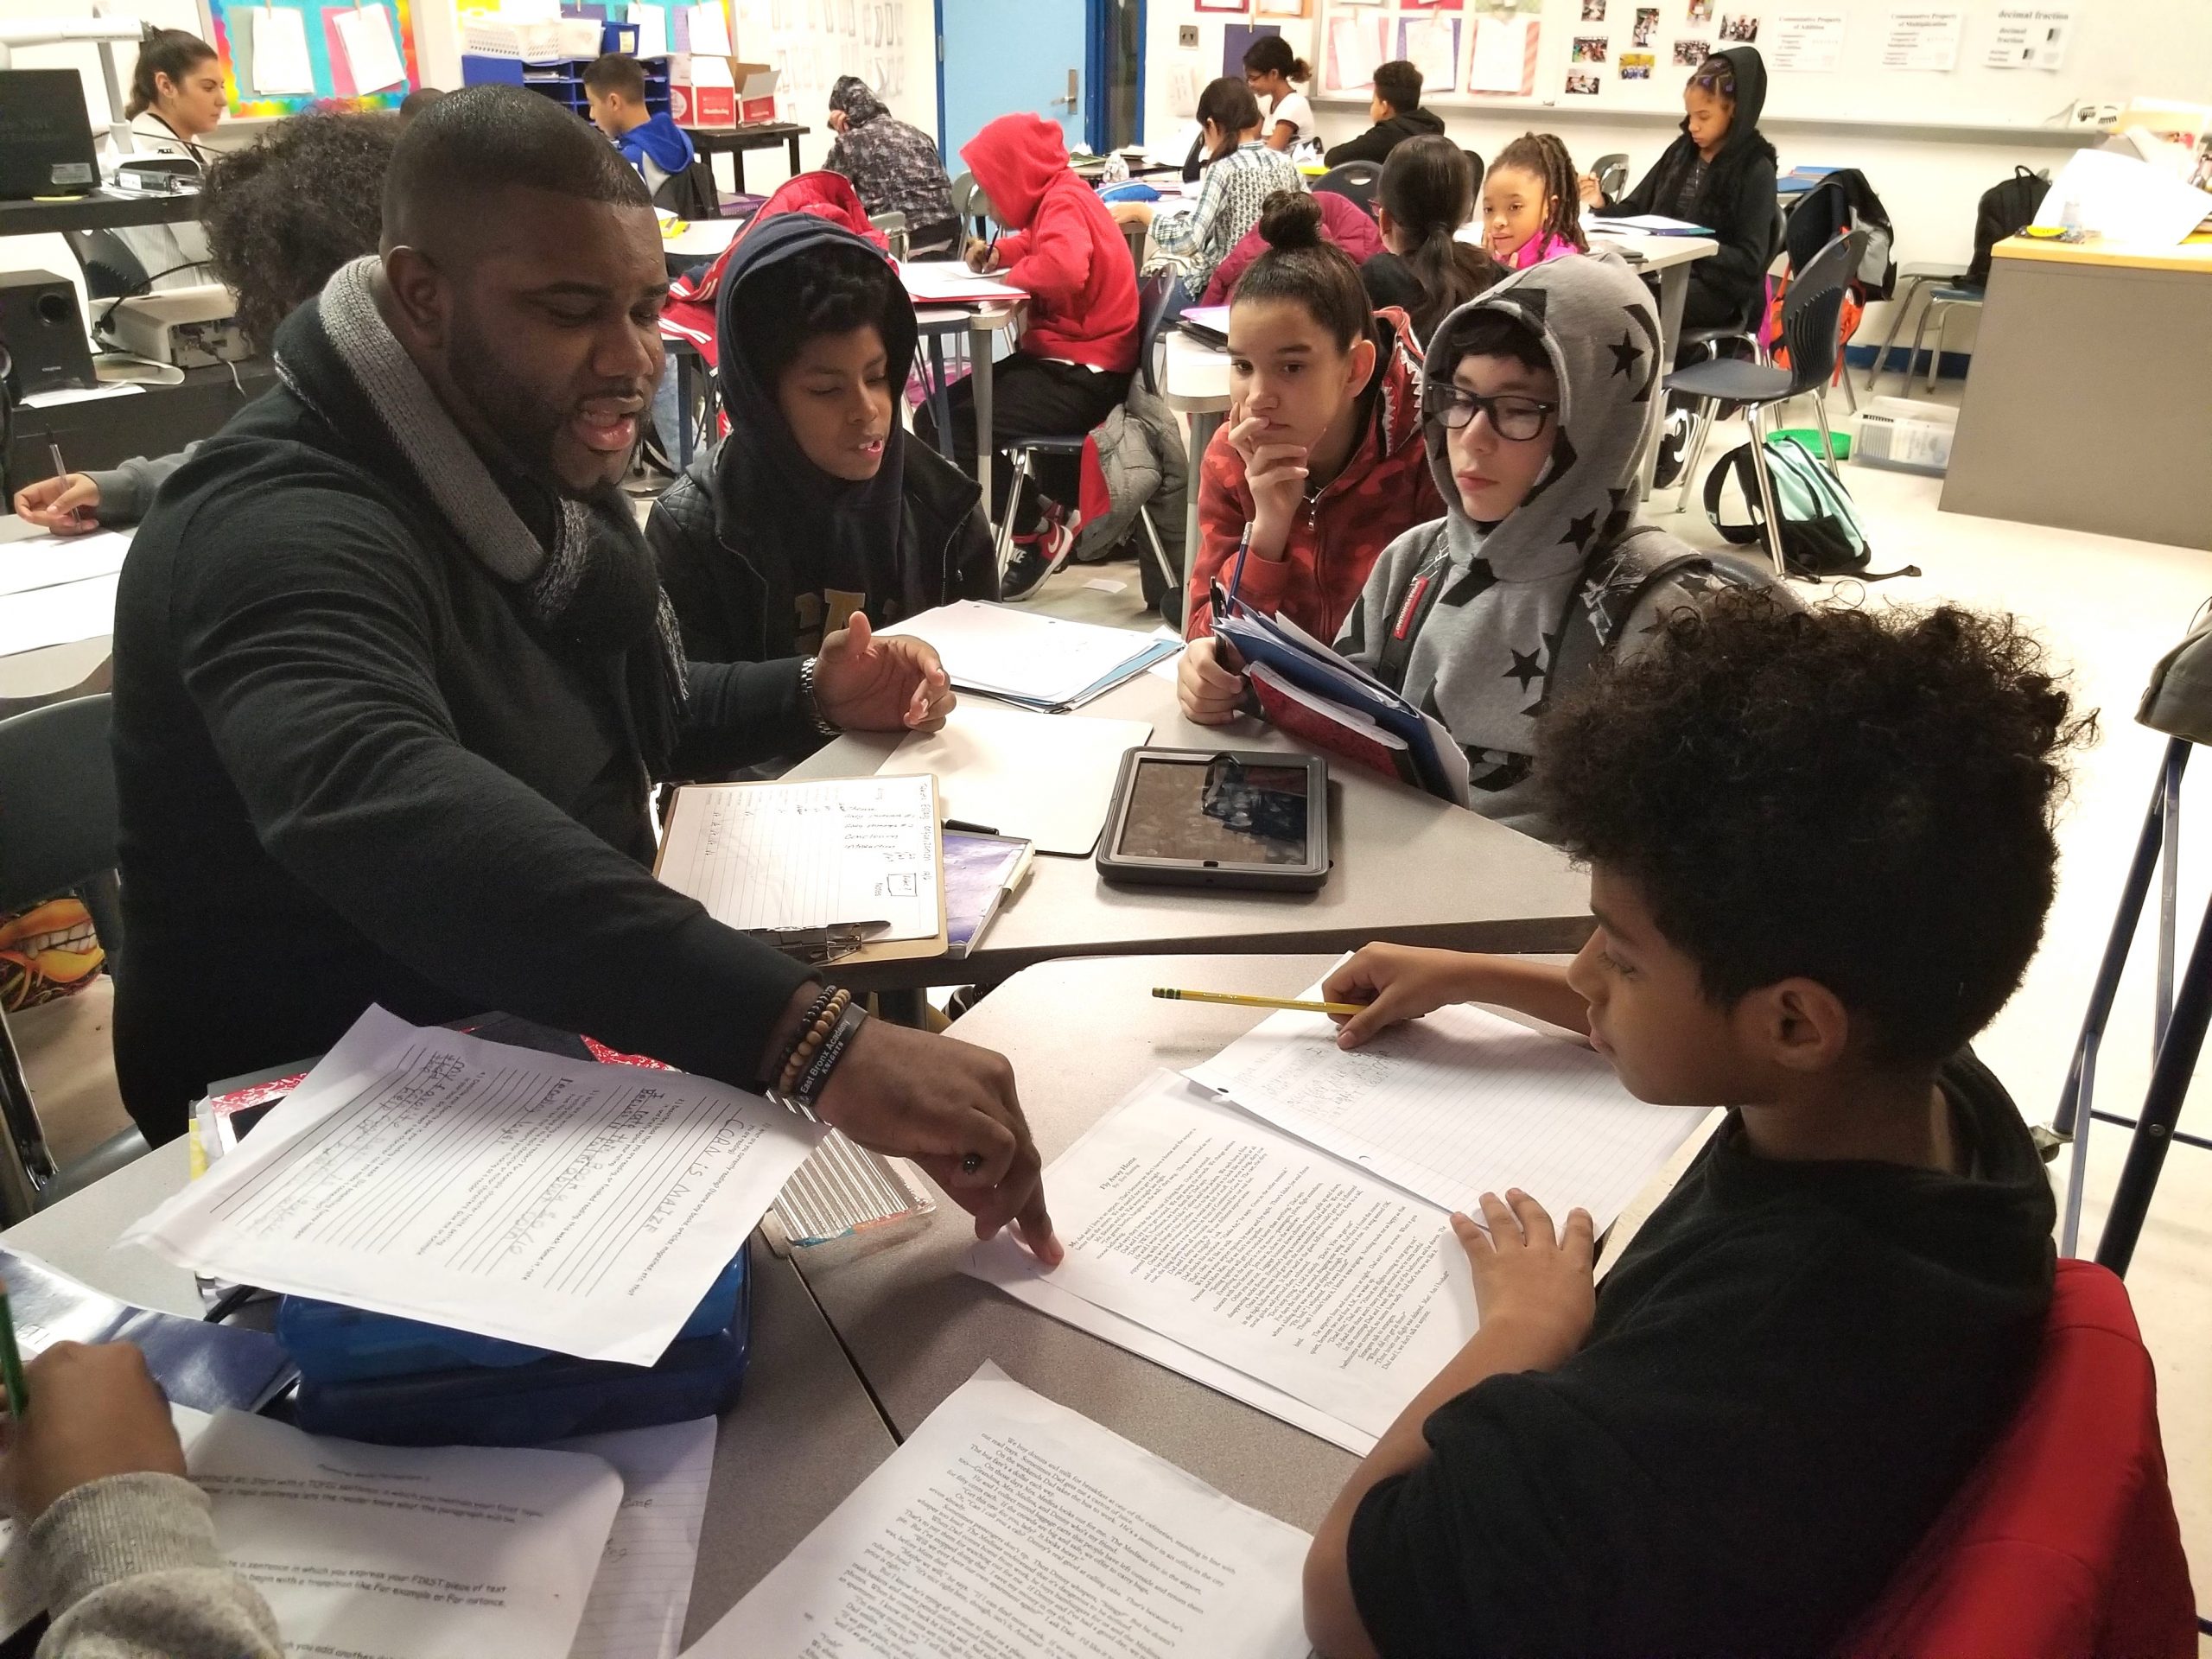 BMCC alumnus Jamel Holmes working with middle school students.